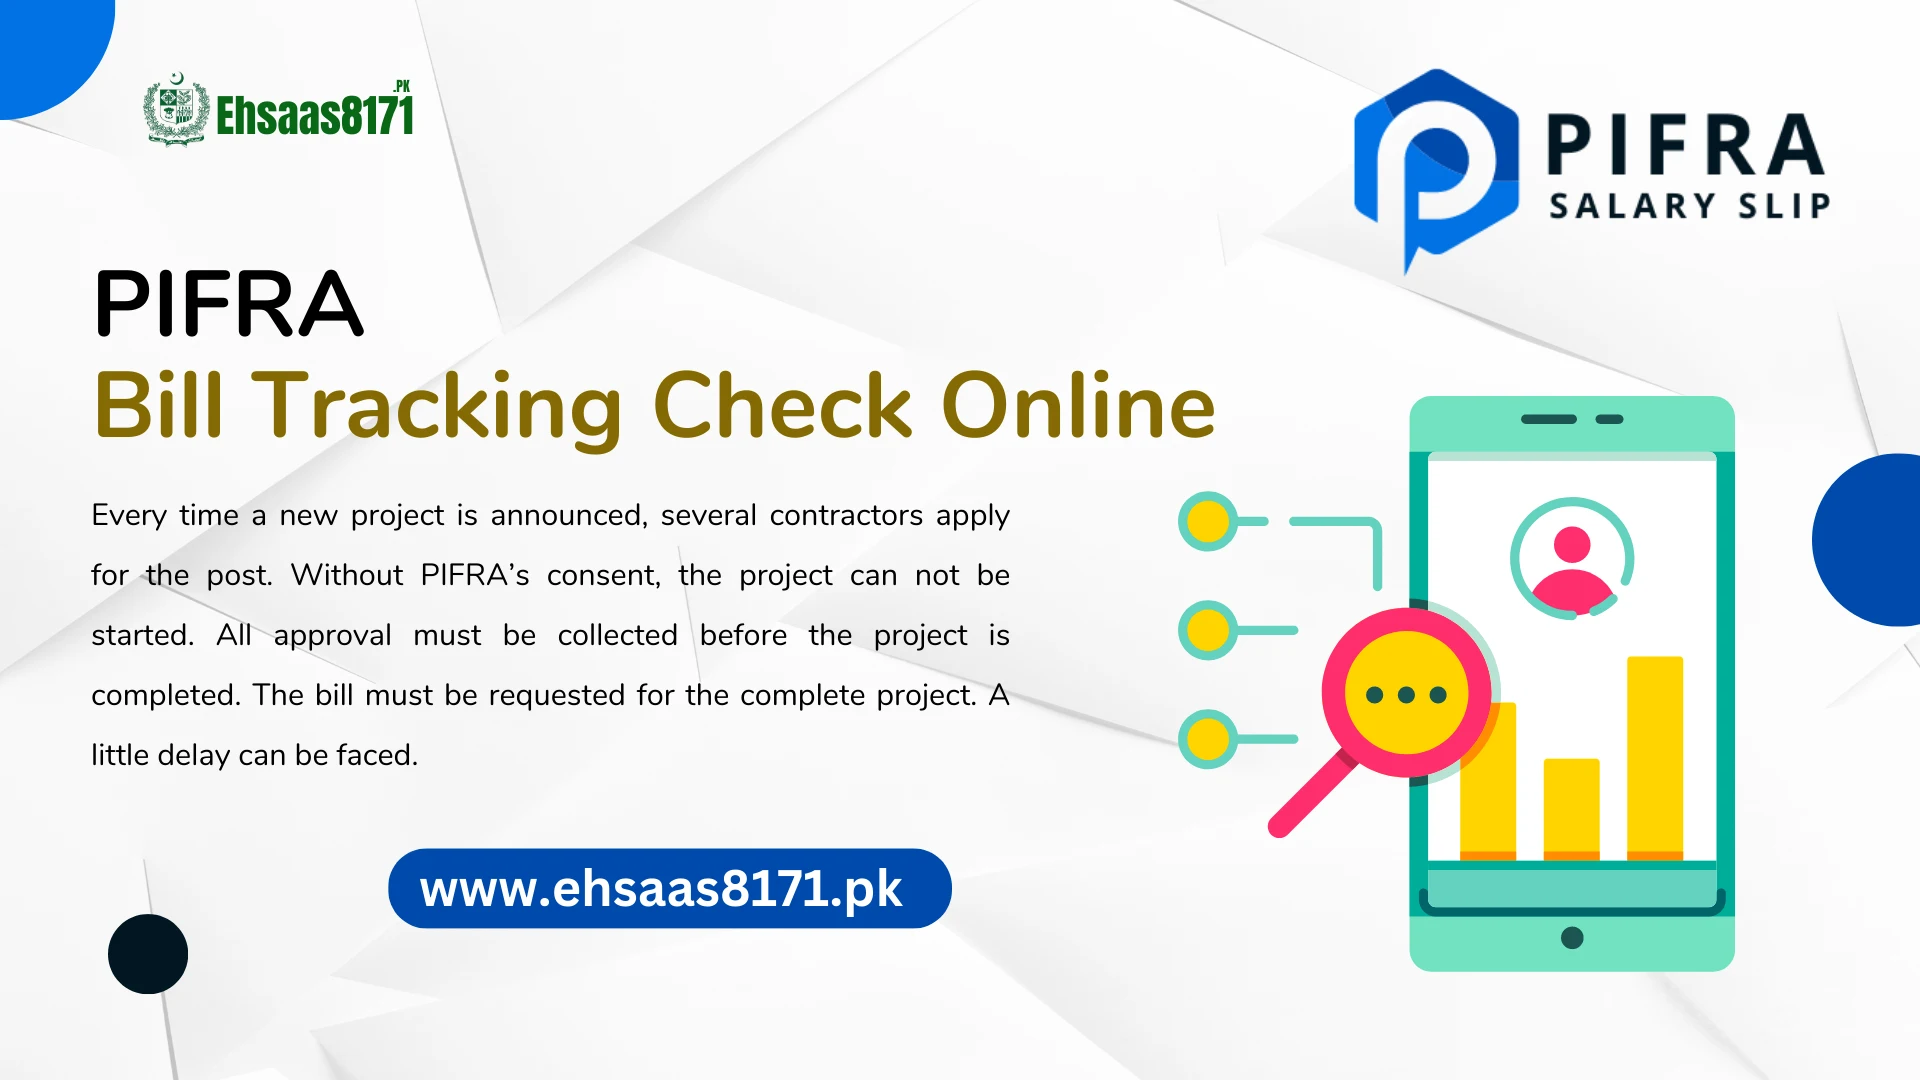 PIFRA Bill Tracking Check Online